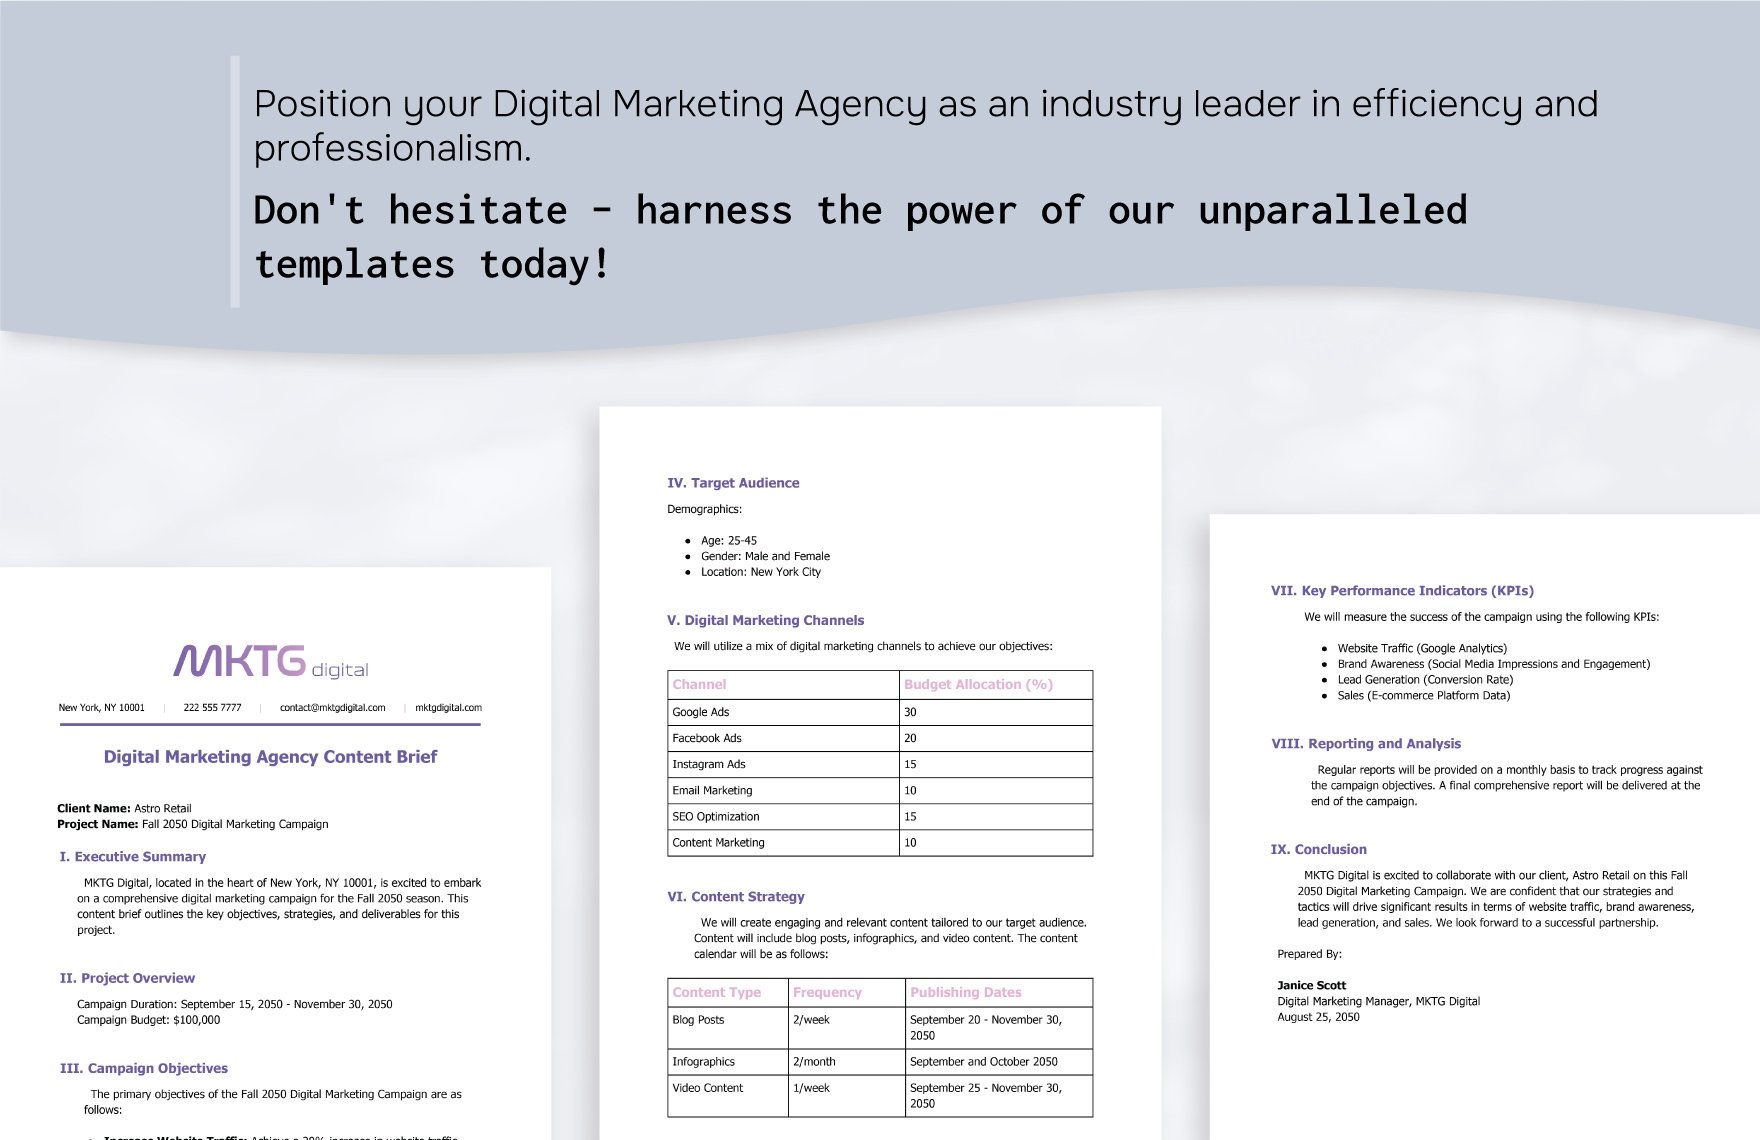 Digital Marketing Agency Content Brief Template